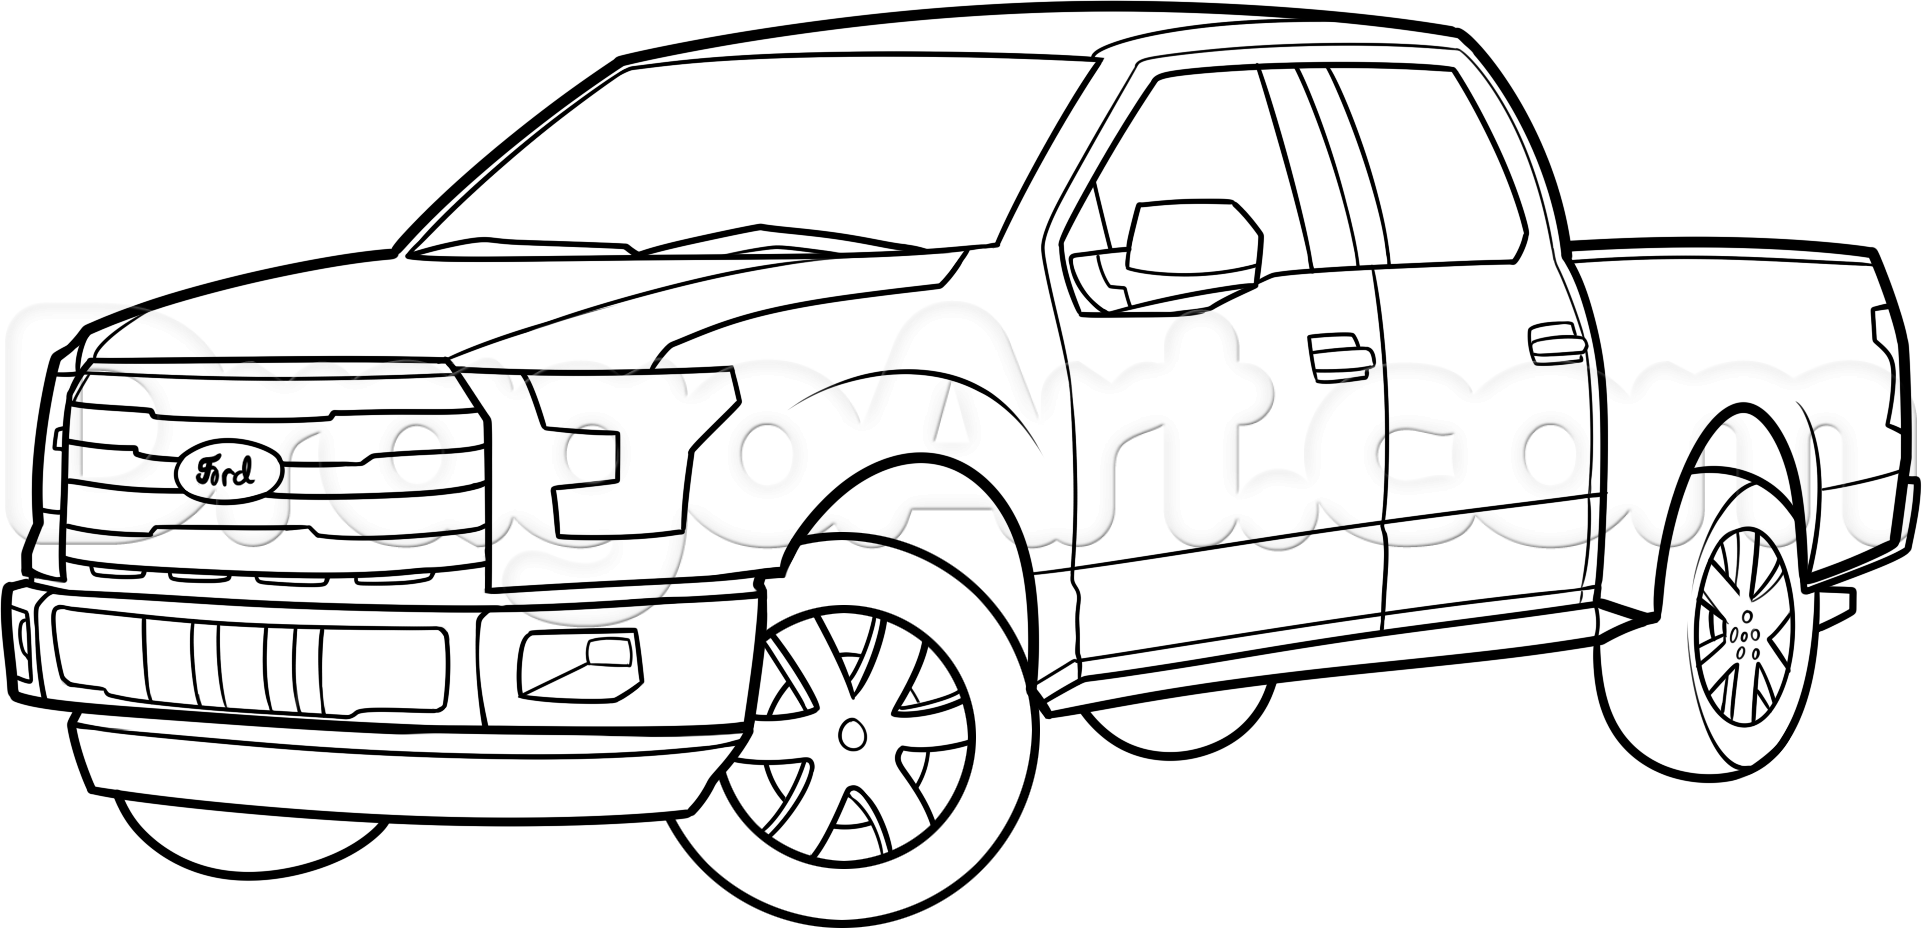 ford-raptor-coloring-pages-at-getcolorings-free-printable-colorings-pages-to-print-and-color